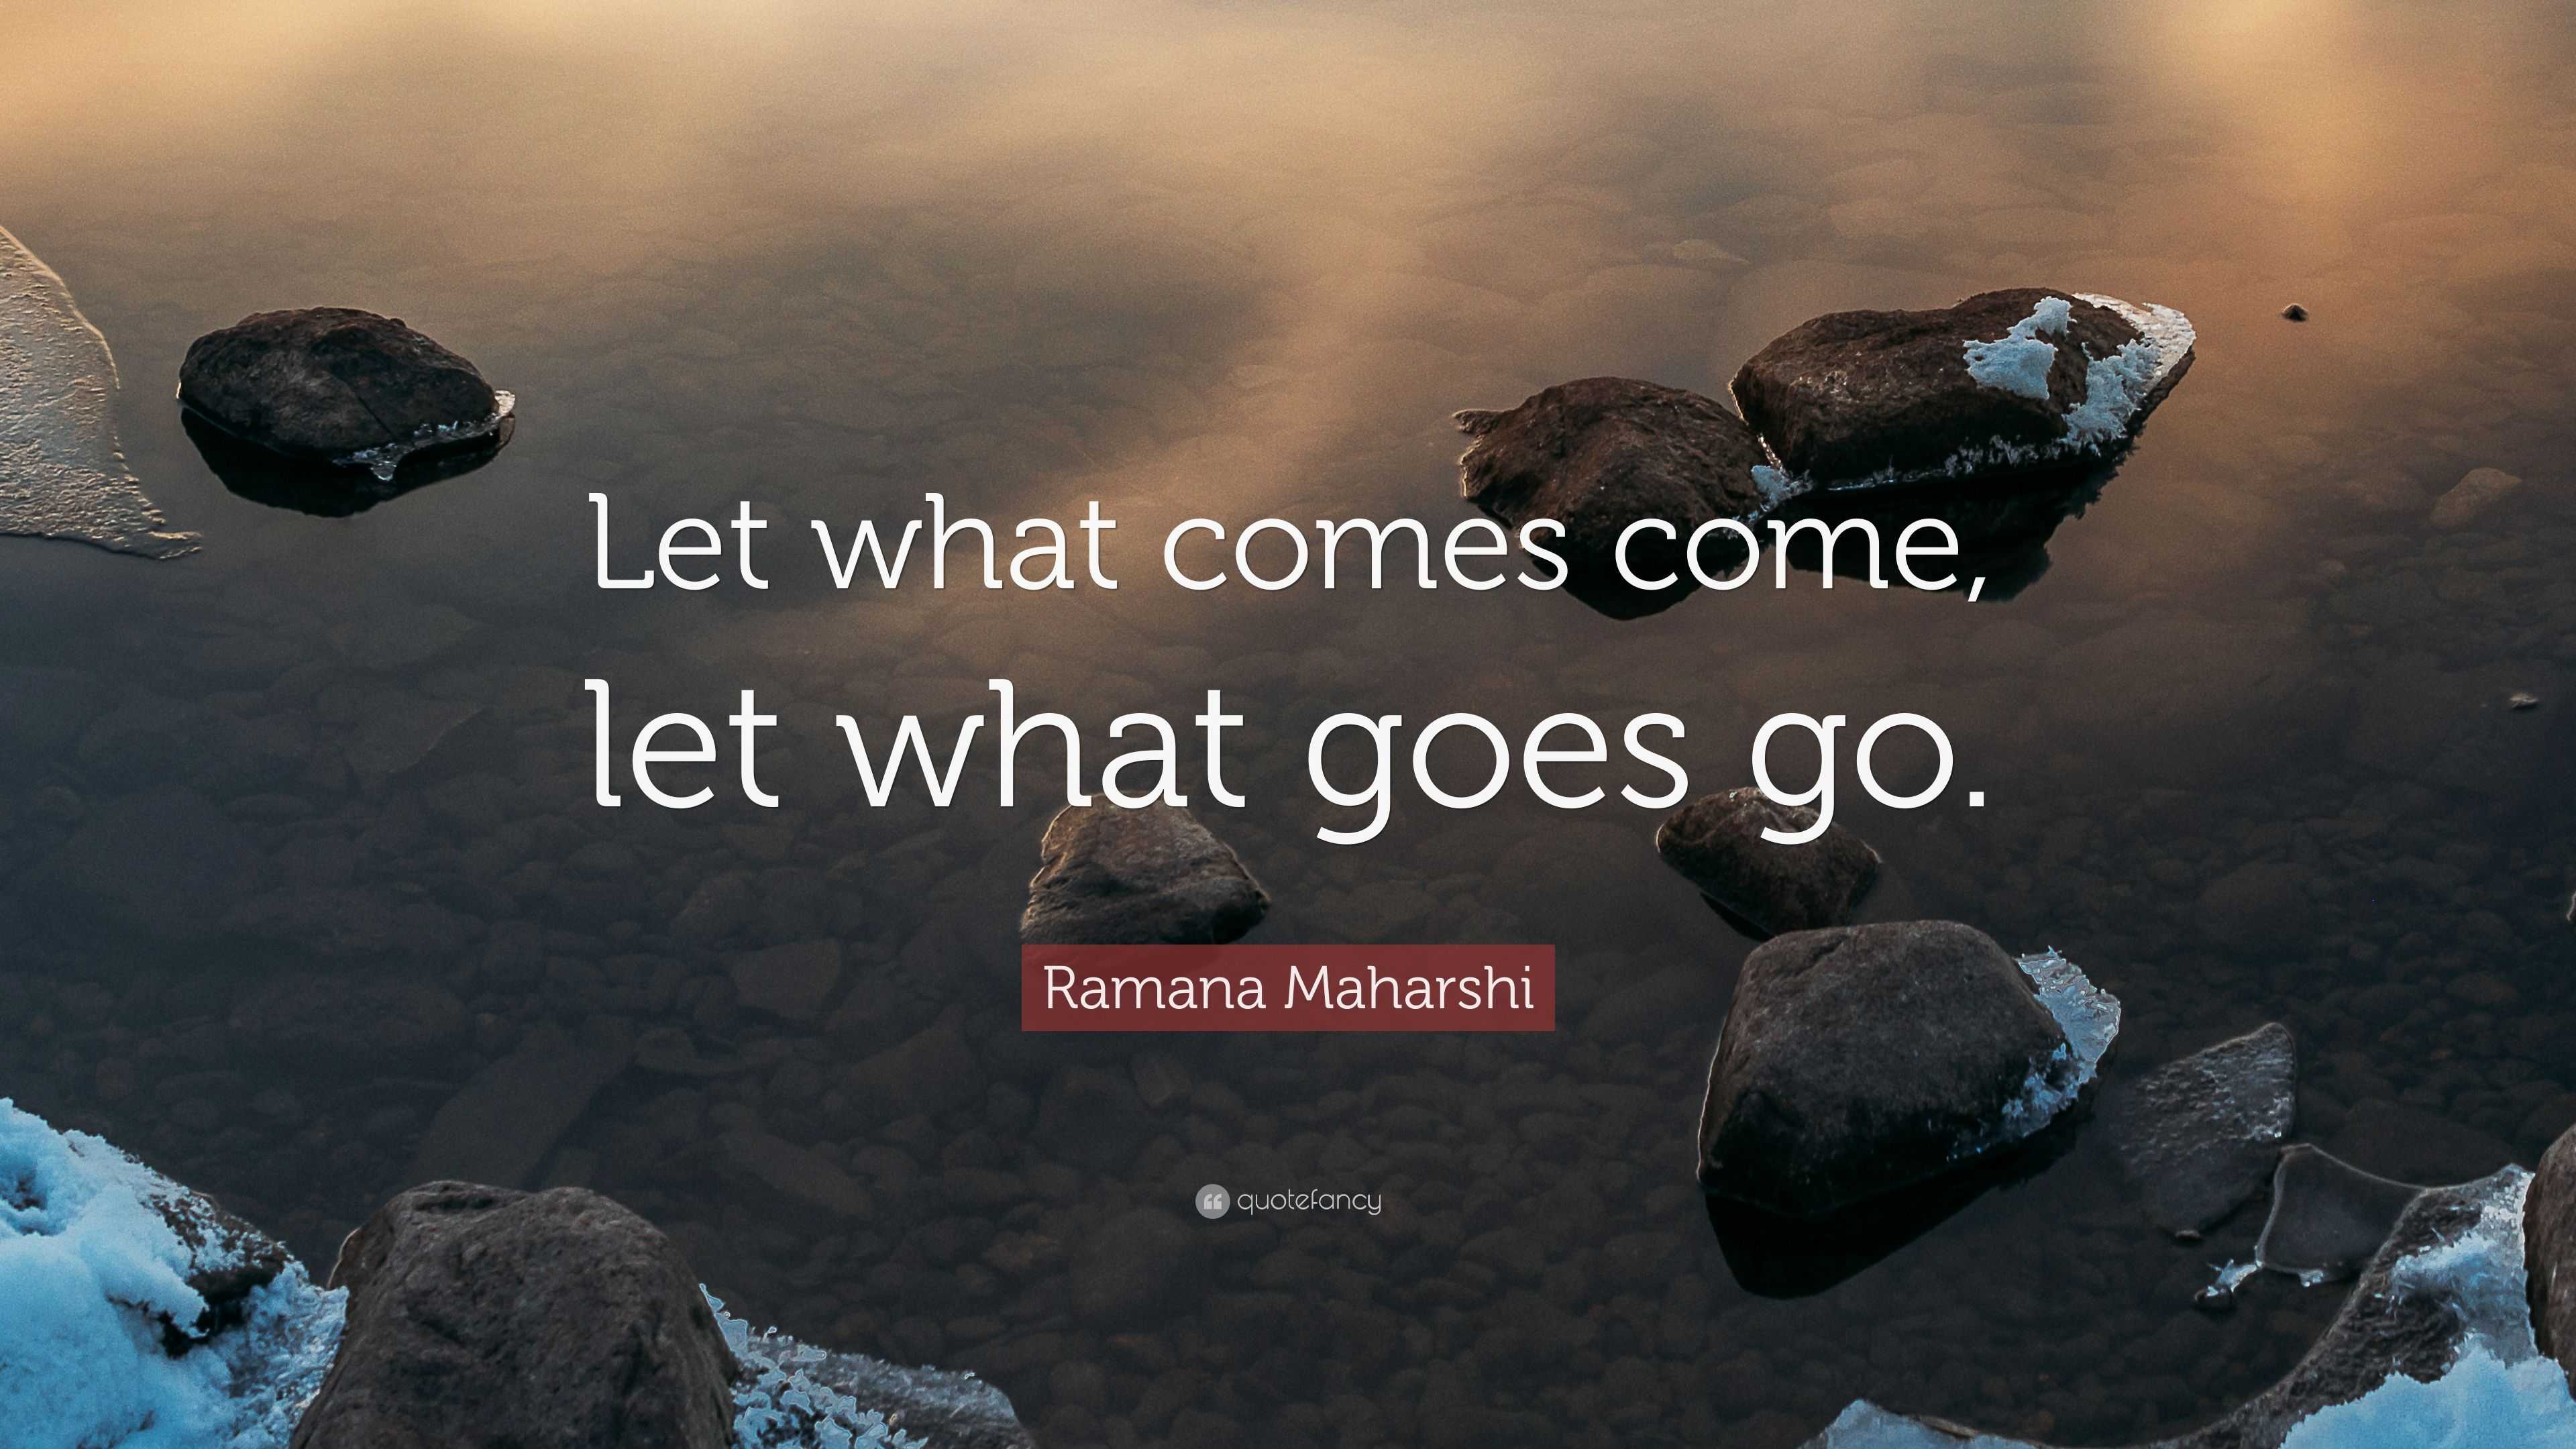 Ramana Maharshi Quote: “Let what comes come, let what goes go.”